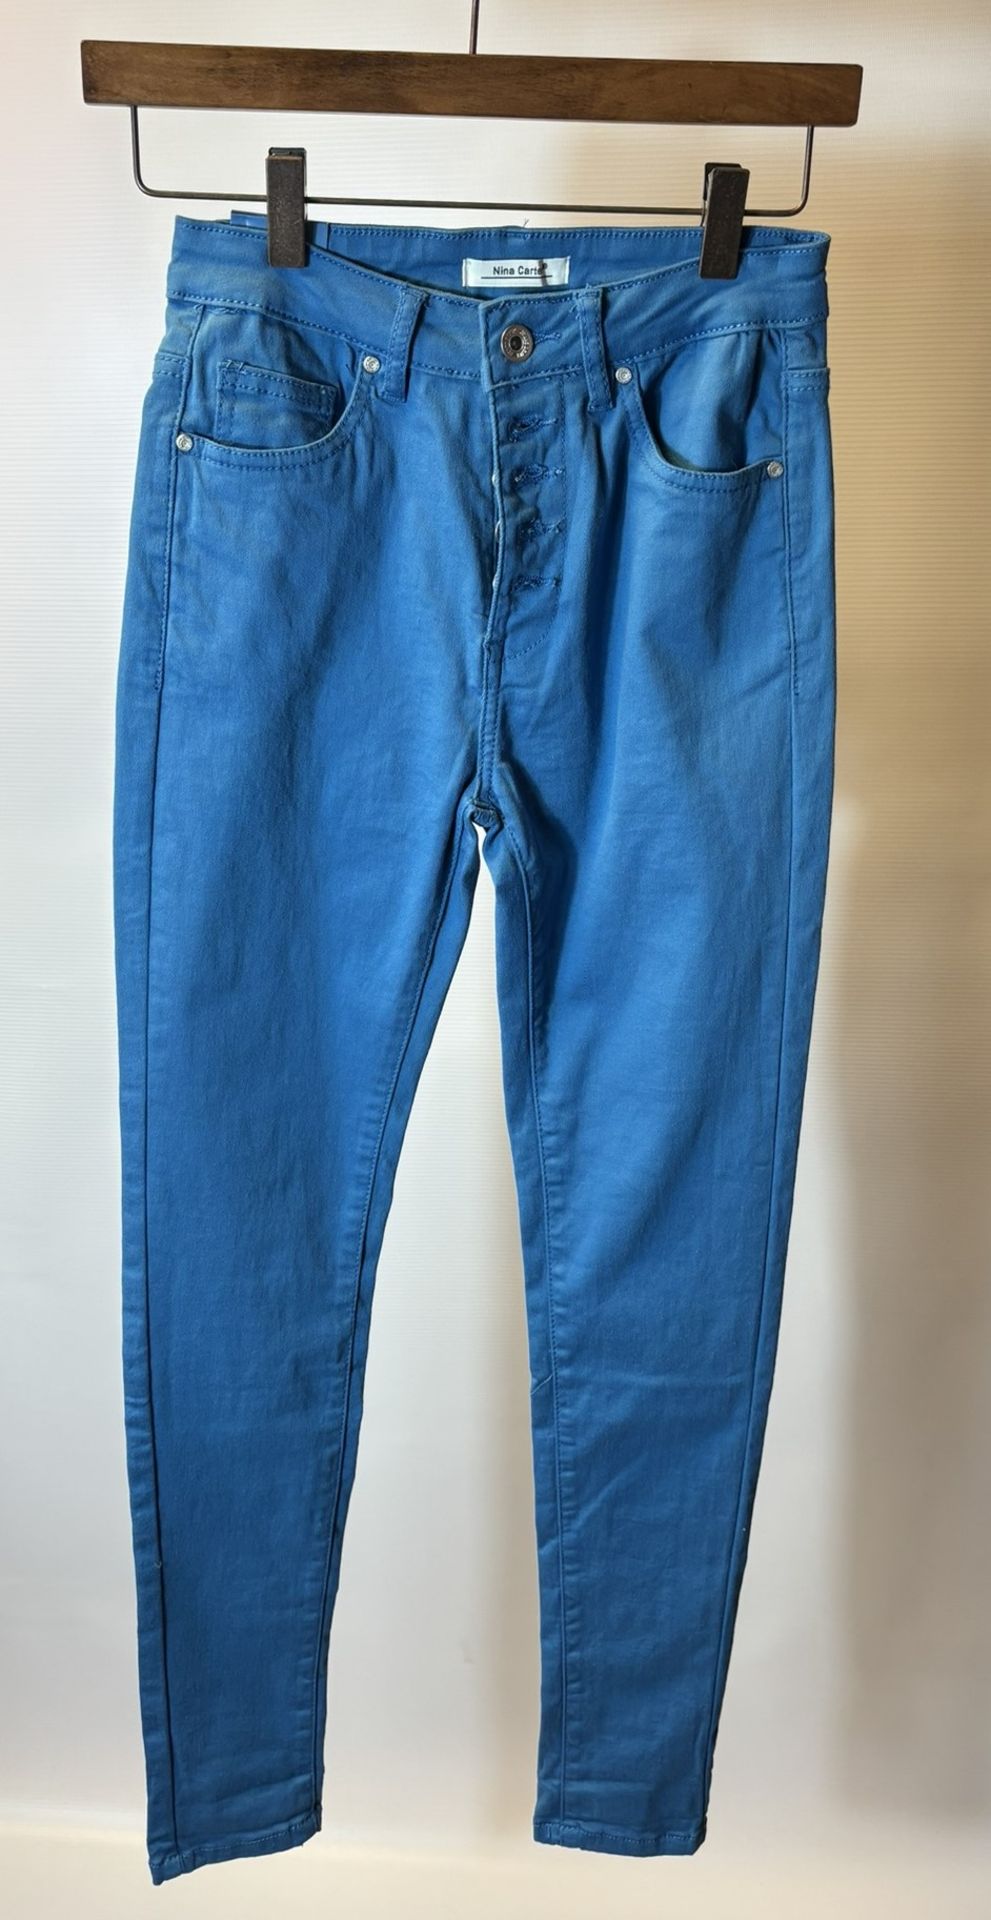 12 x Various Pairs Of Women's Trousers/Jeans As Seen In Photos - Bild 31 aus 36